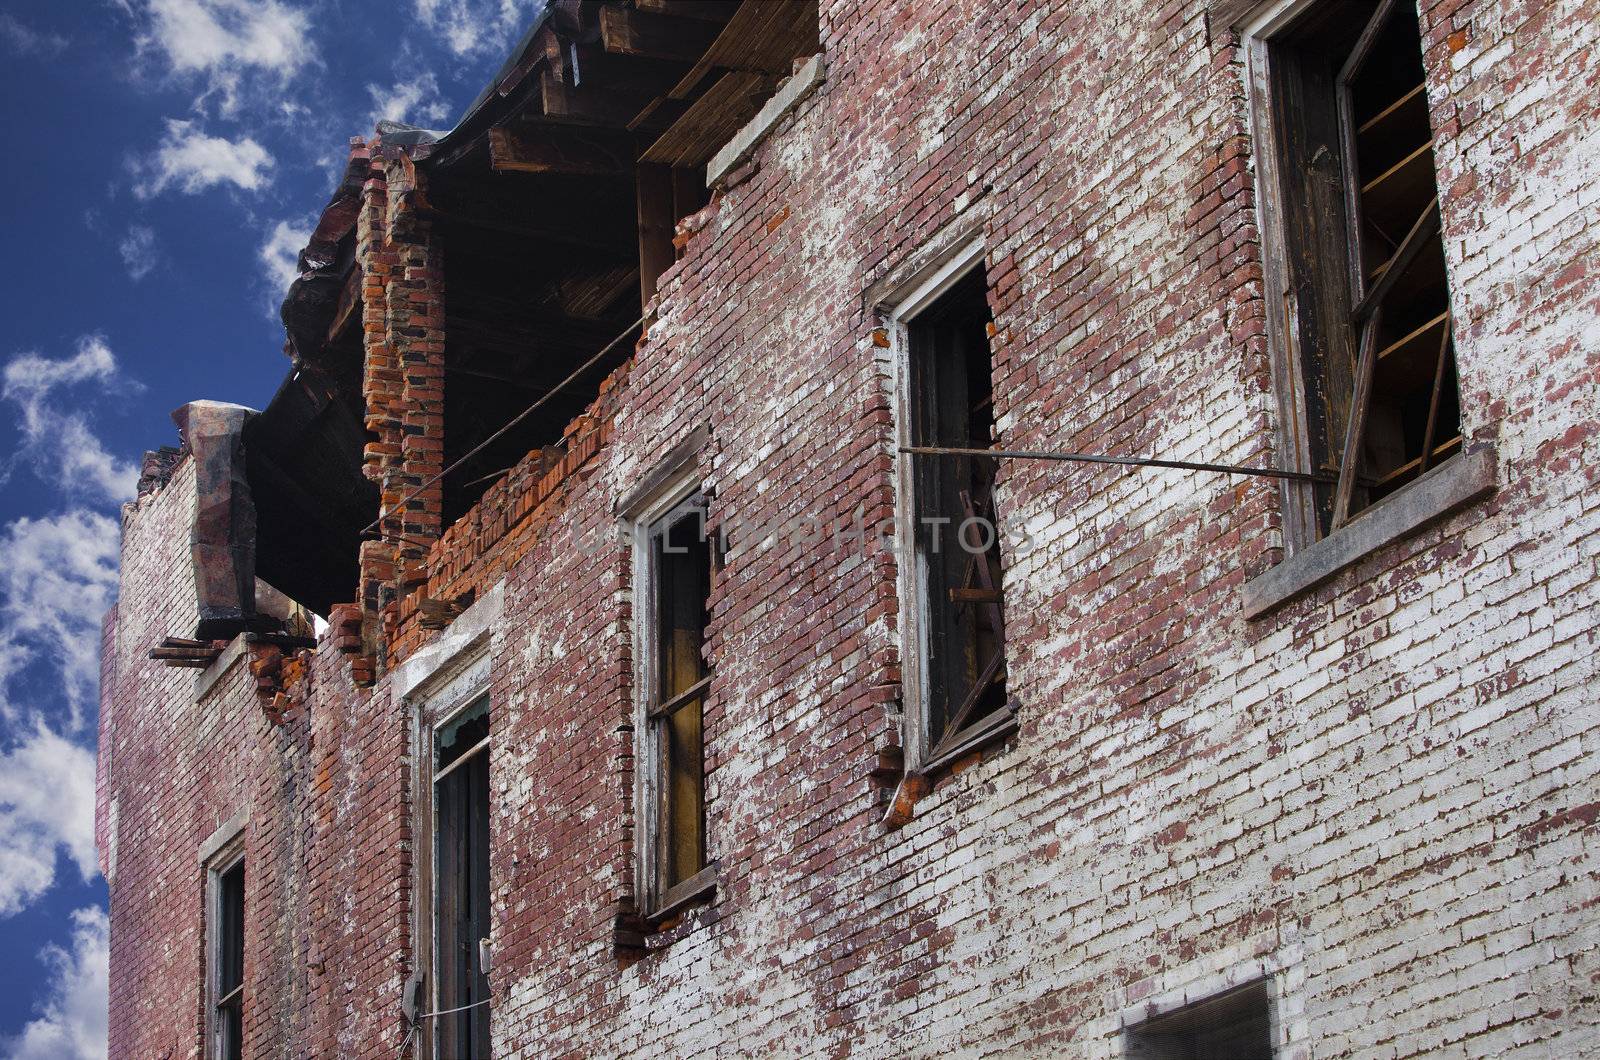 Fire Damaged Brick Building by mary981